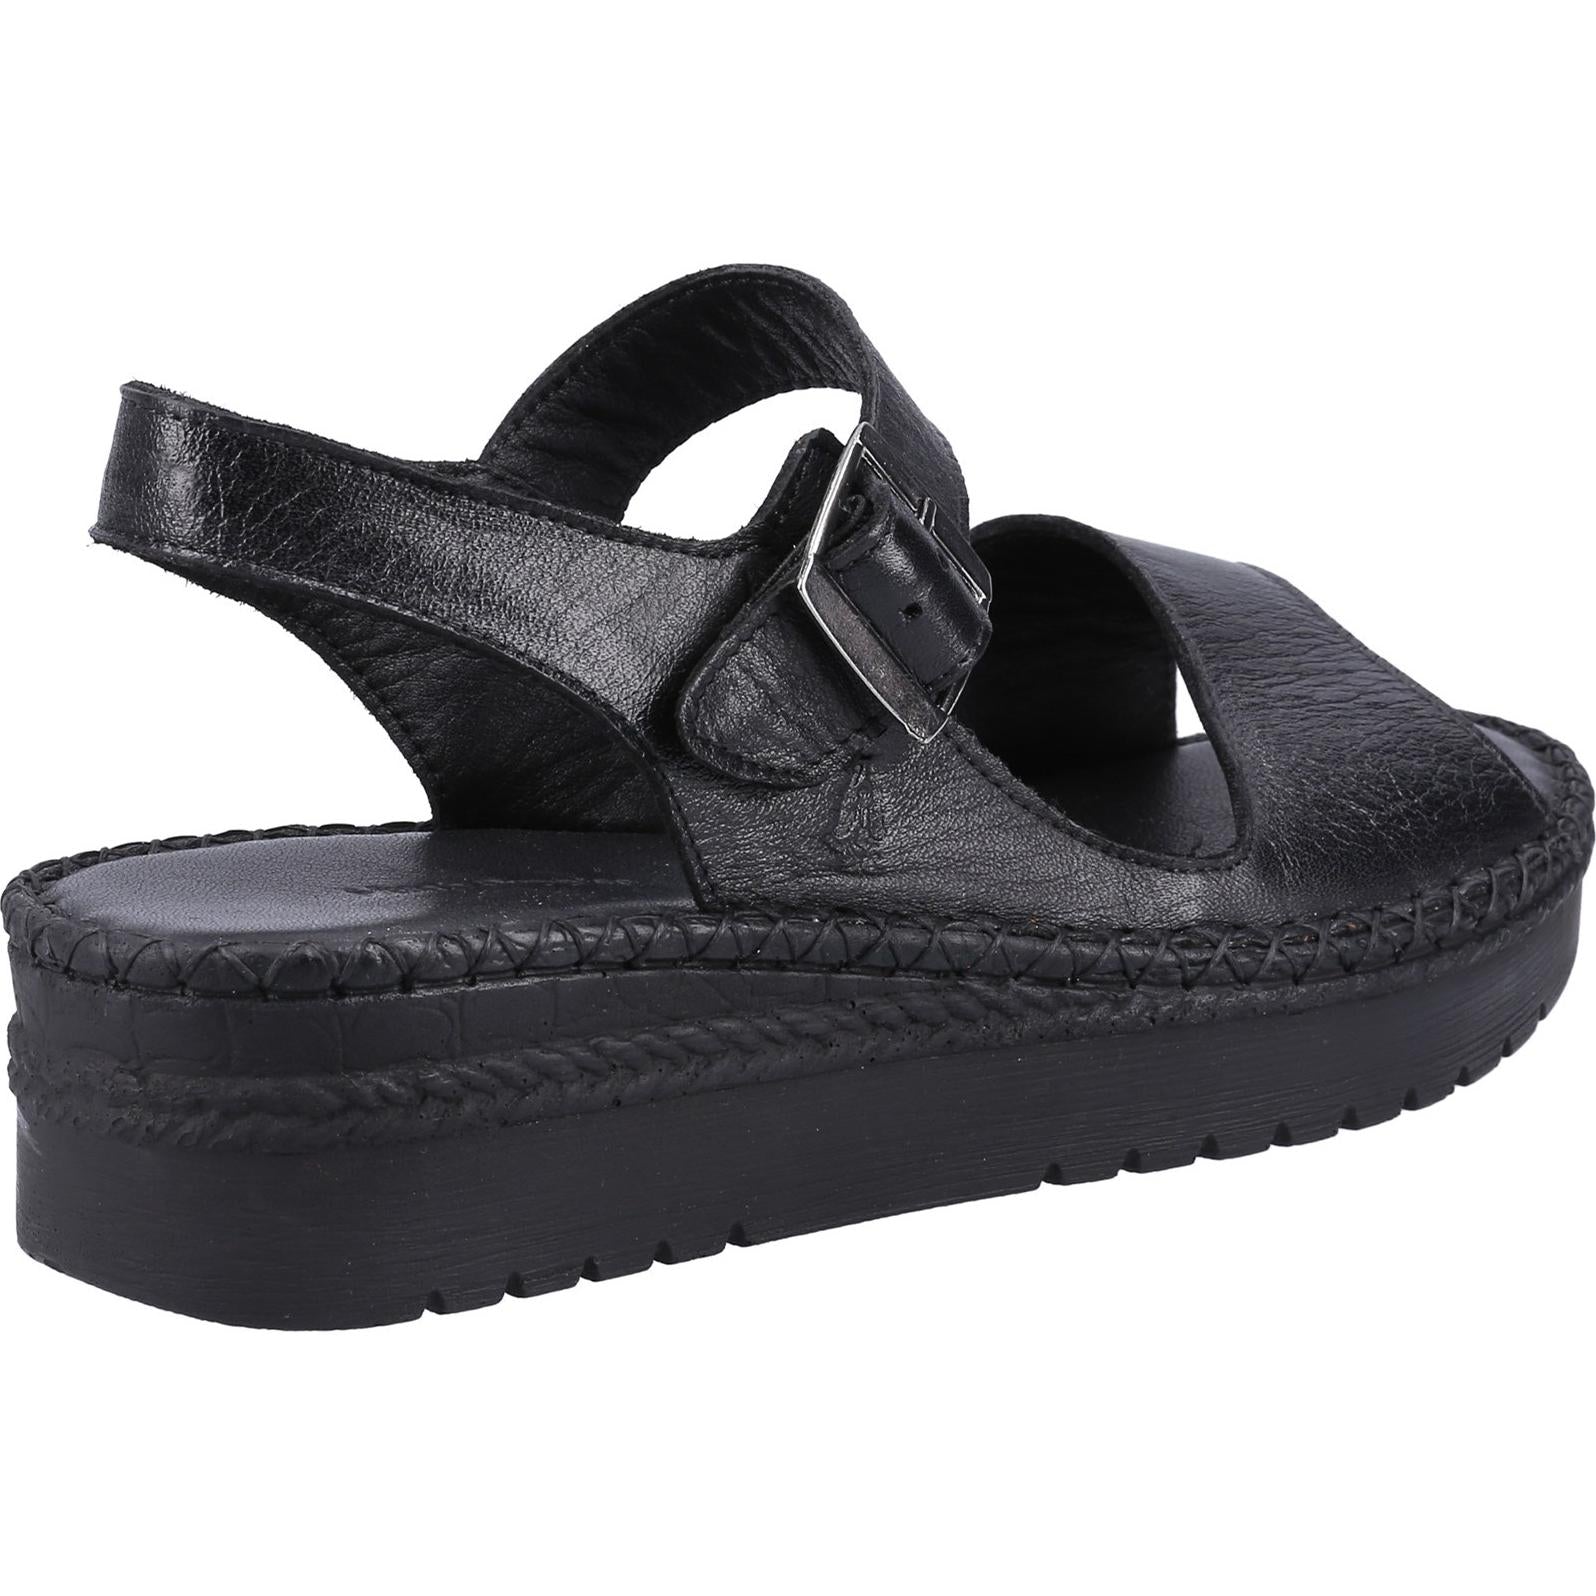 Hush Puppies Stacey Sandal